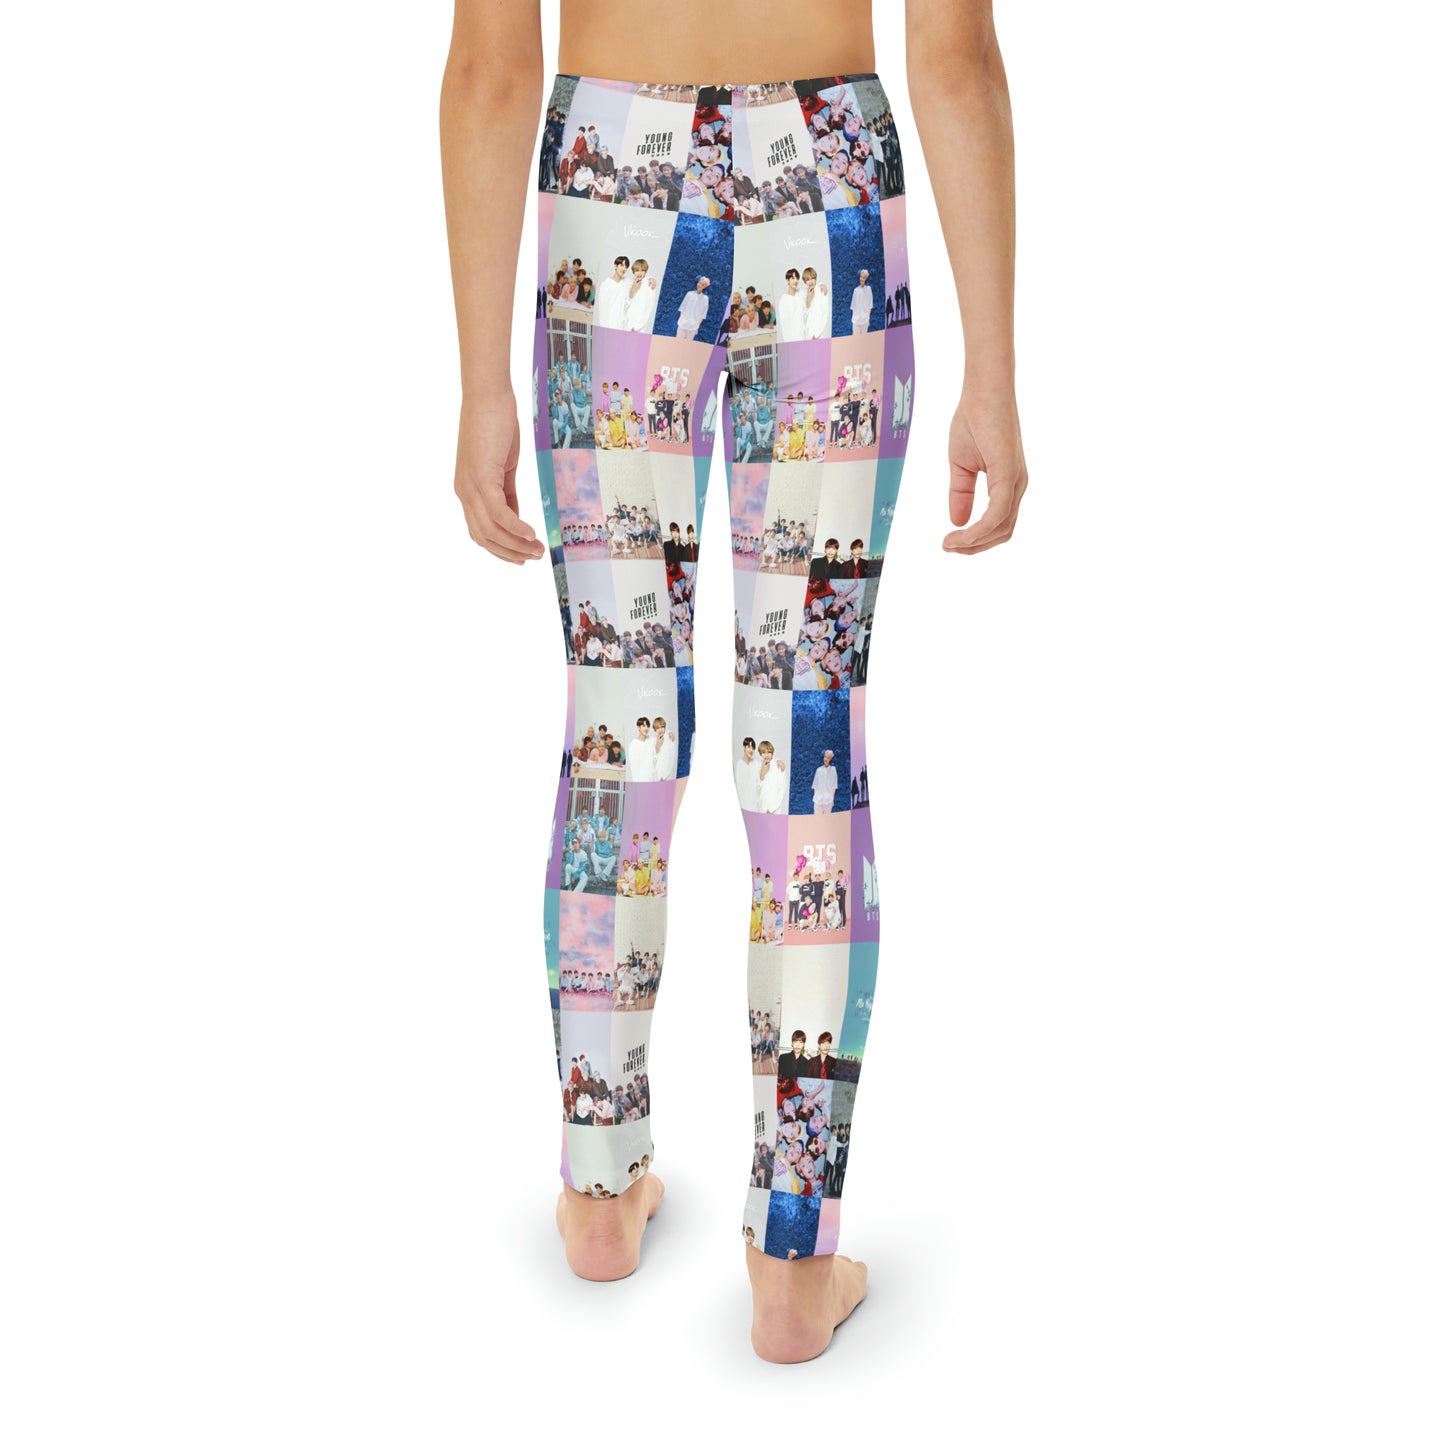 BTS Pastel Aesthetic Collage Youth Leggings